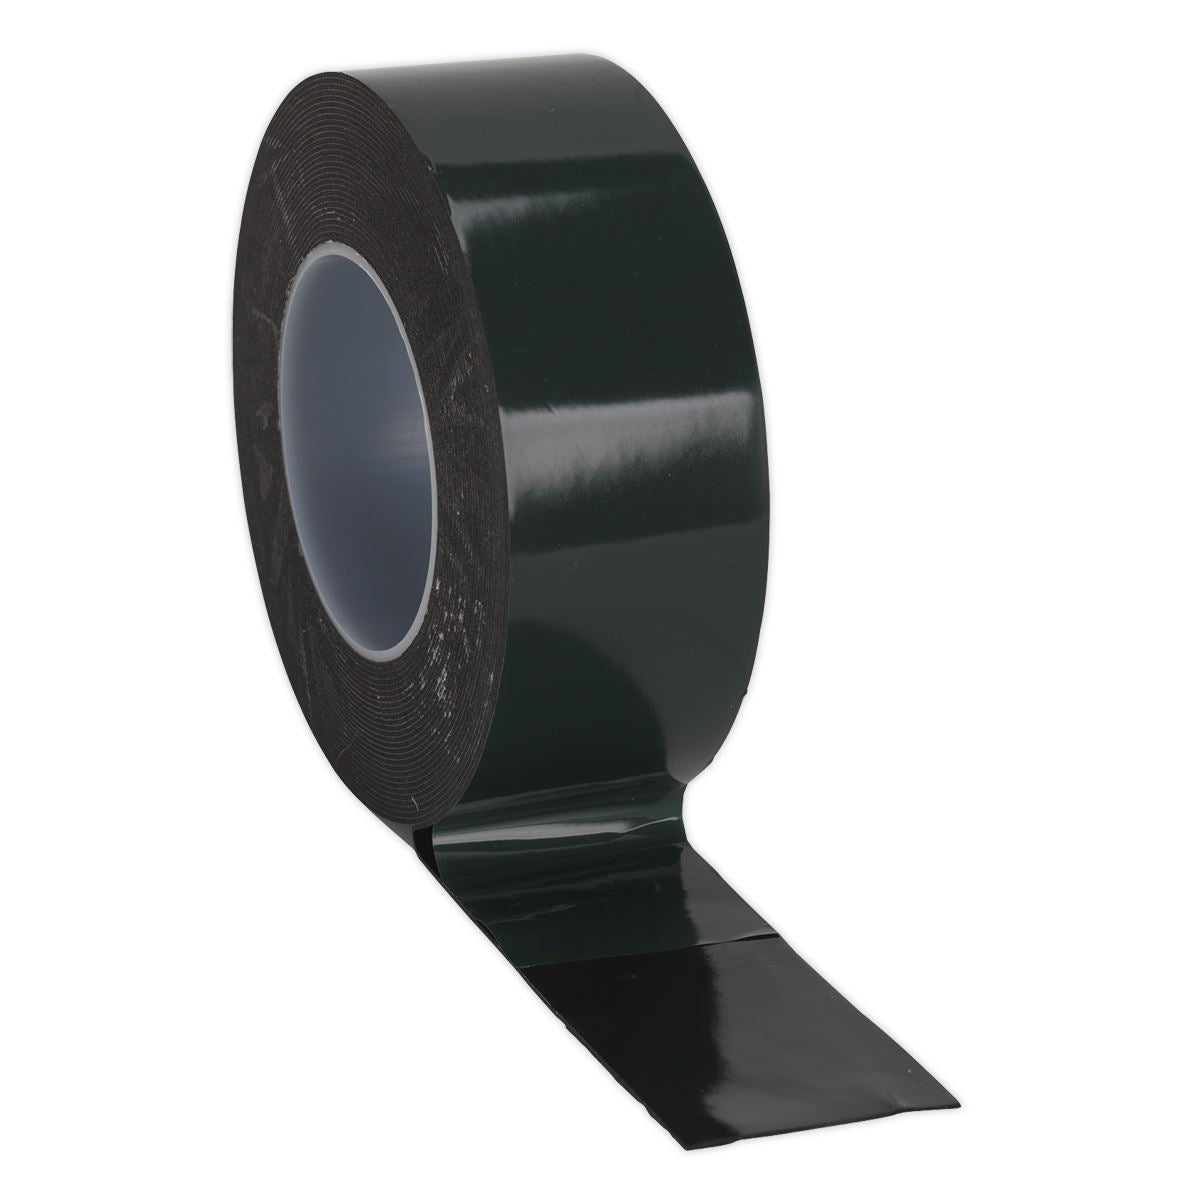 Sealey Double-Sided Adhesive Foam Tape 50mm x 10m Green Backing